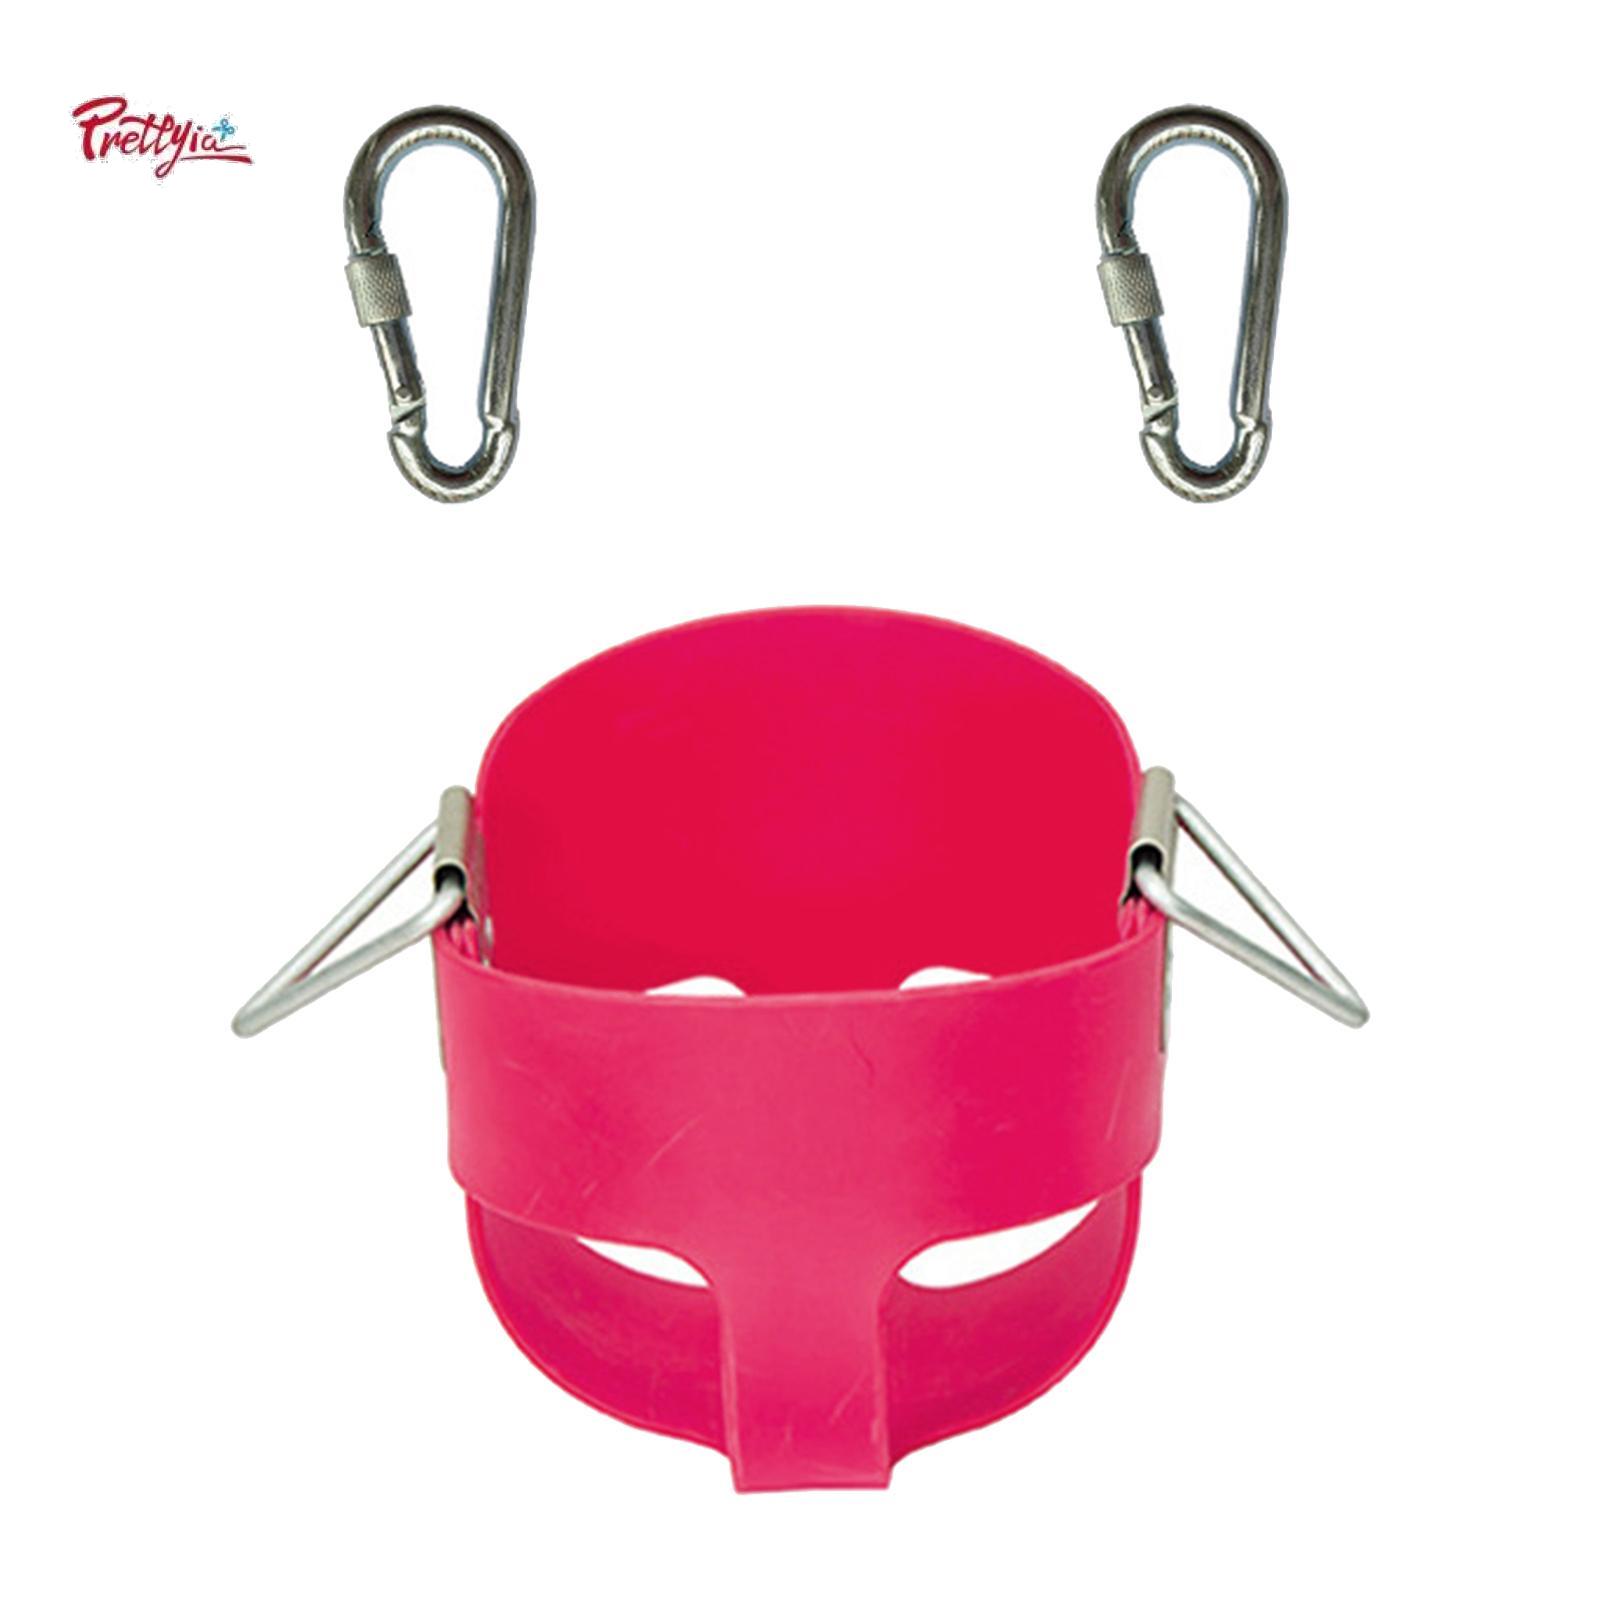 Prettyia Bucket Swing Seat Swing Sets Accessories Outdoor for Camping